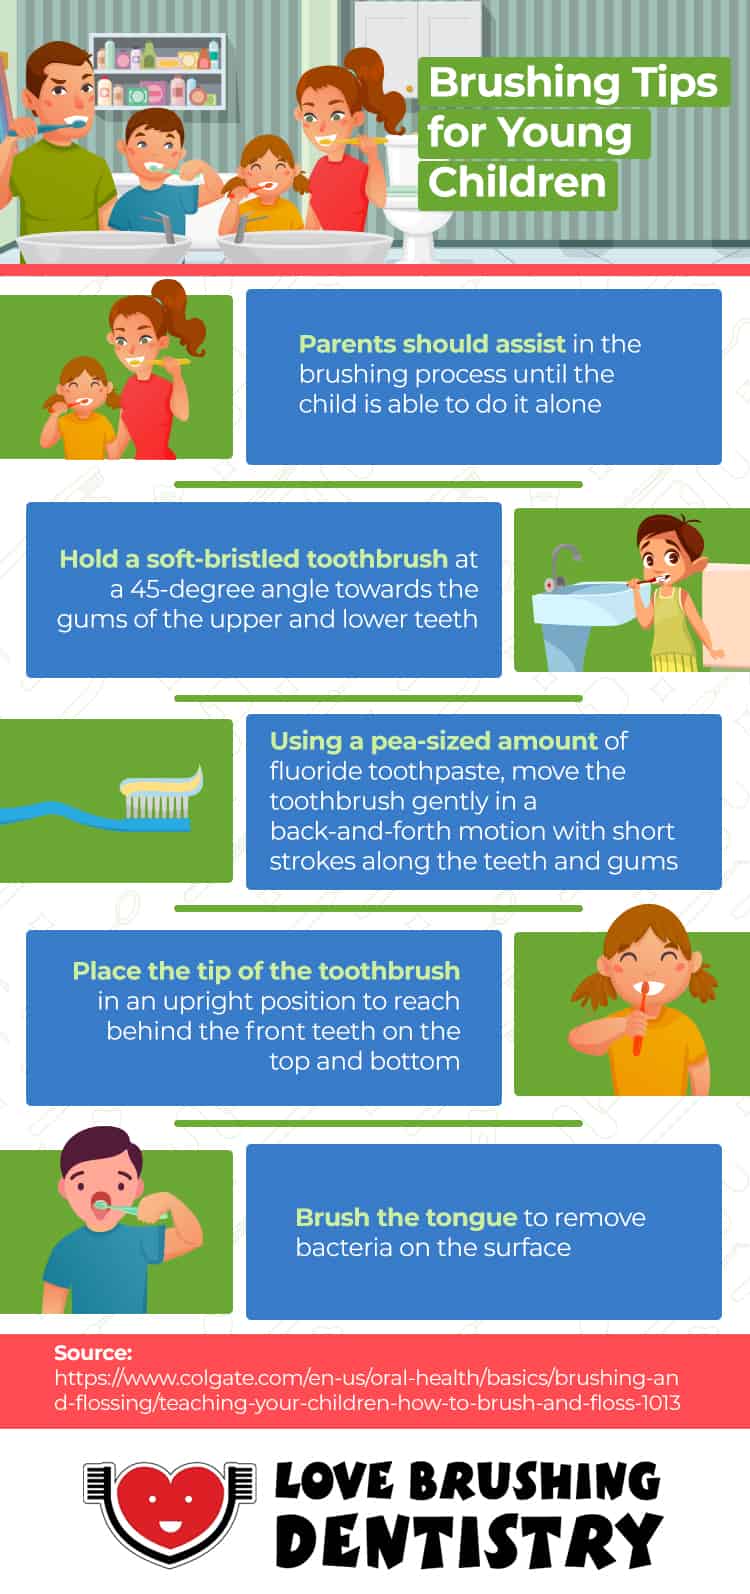 infographic displaying brushing tips for young children